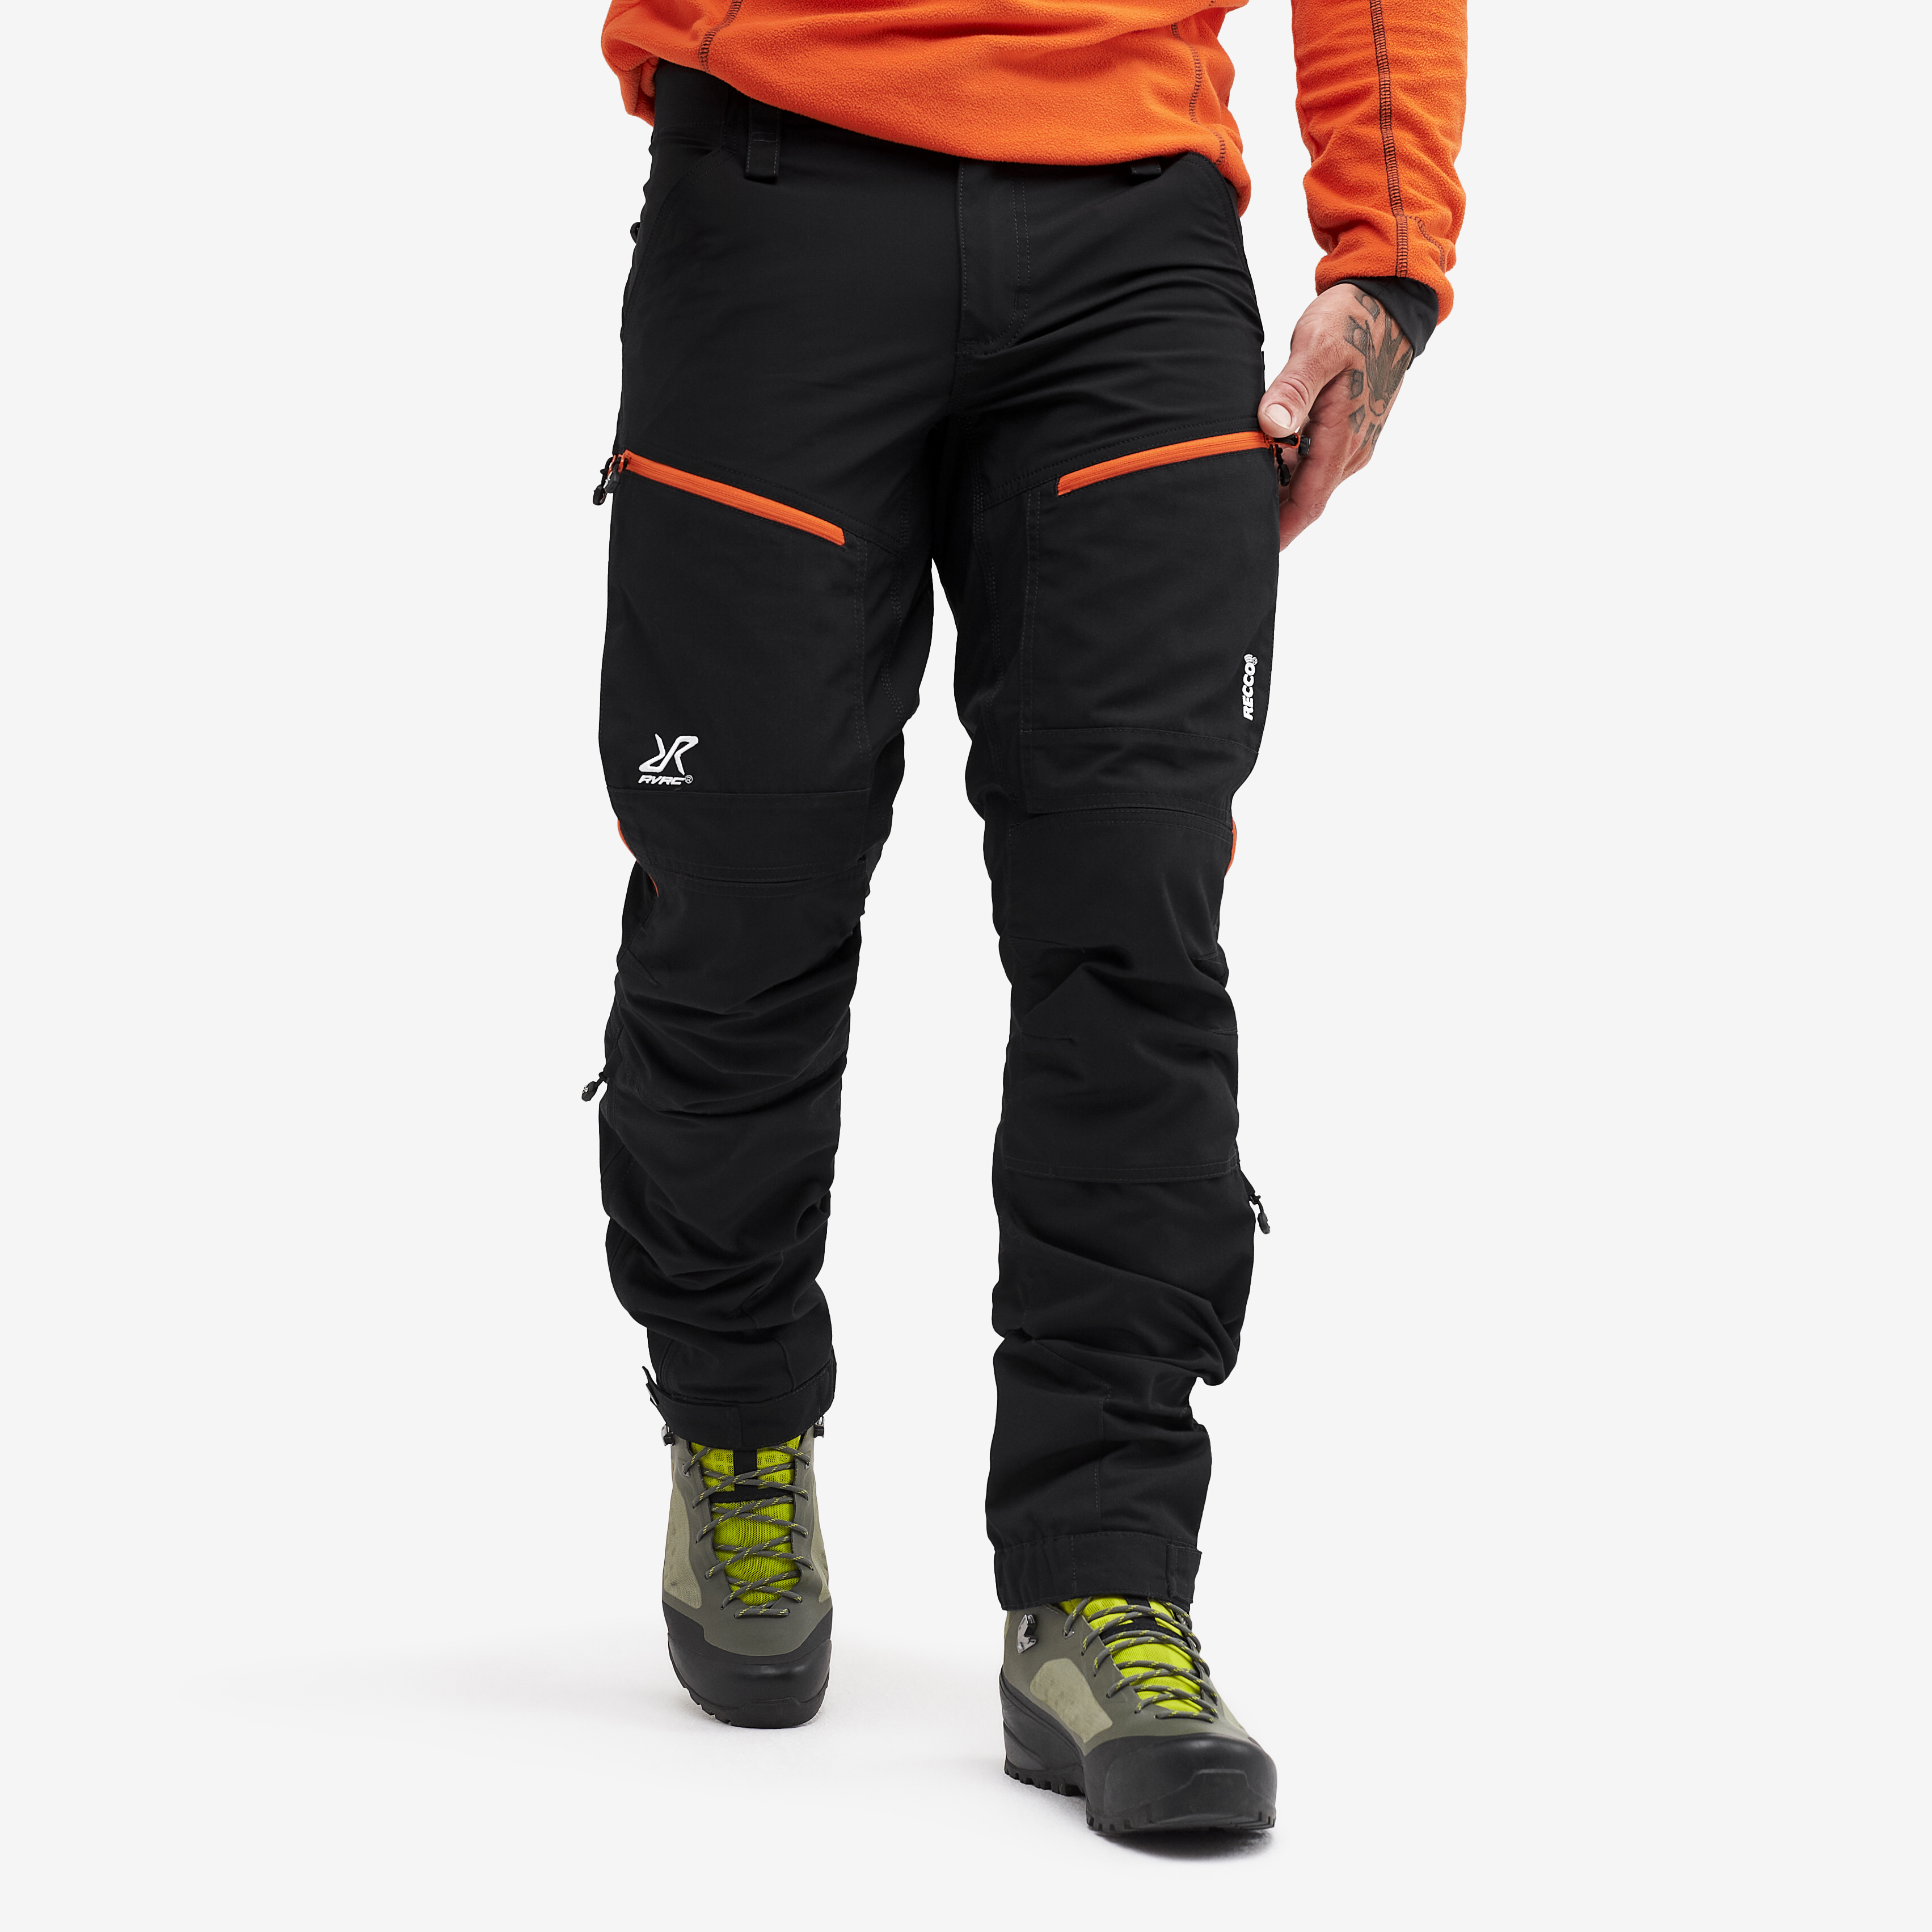 RVRC GP Pro Rescue hiking trousers for men in black